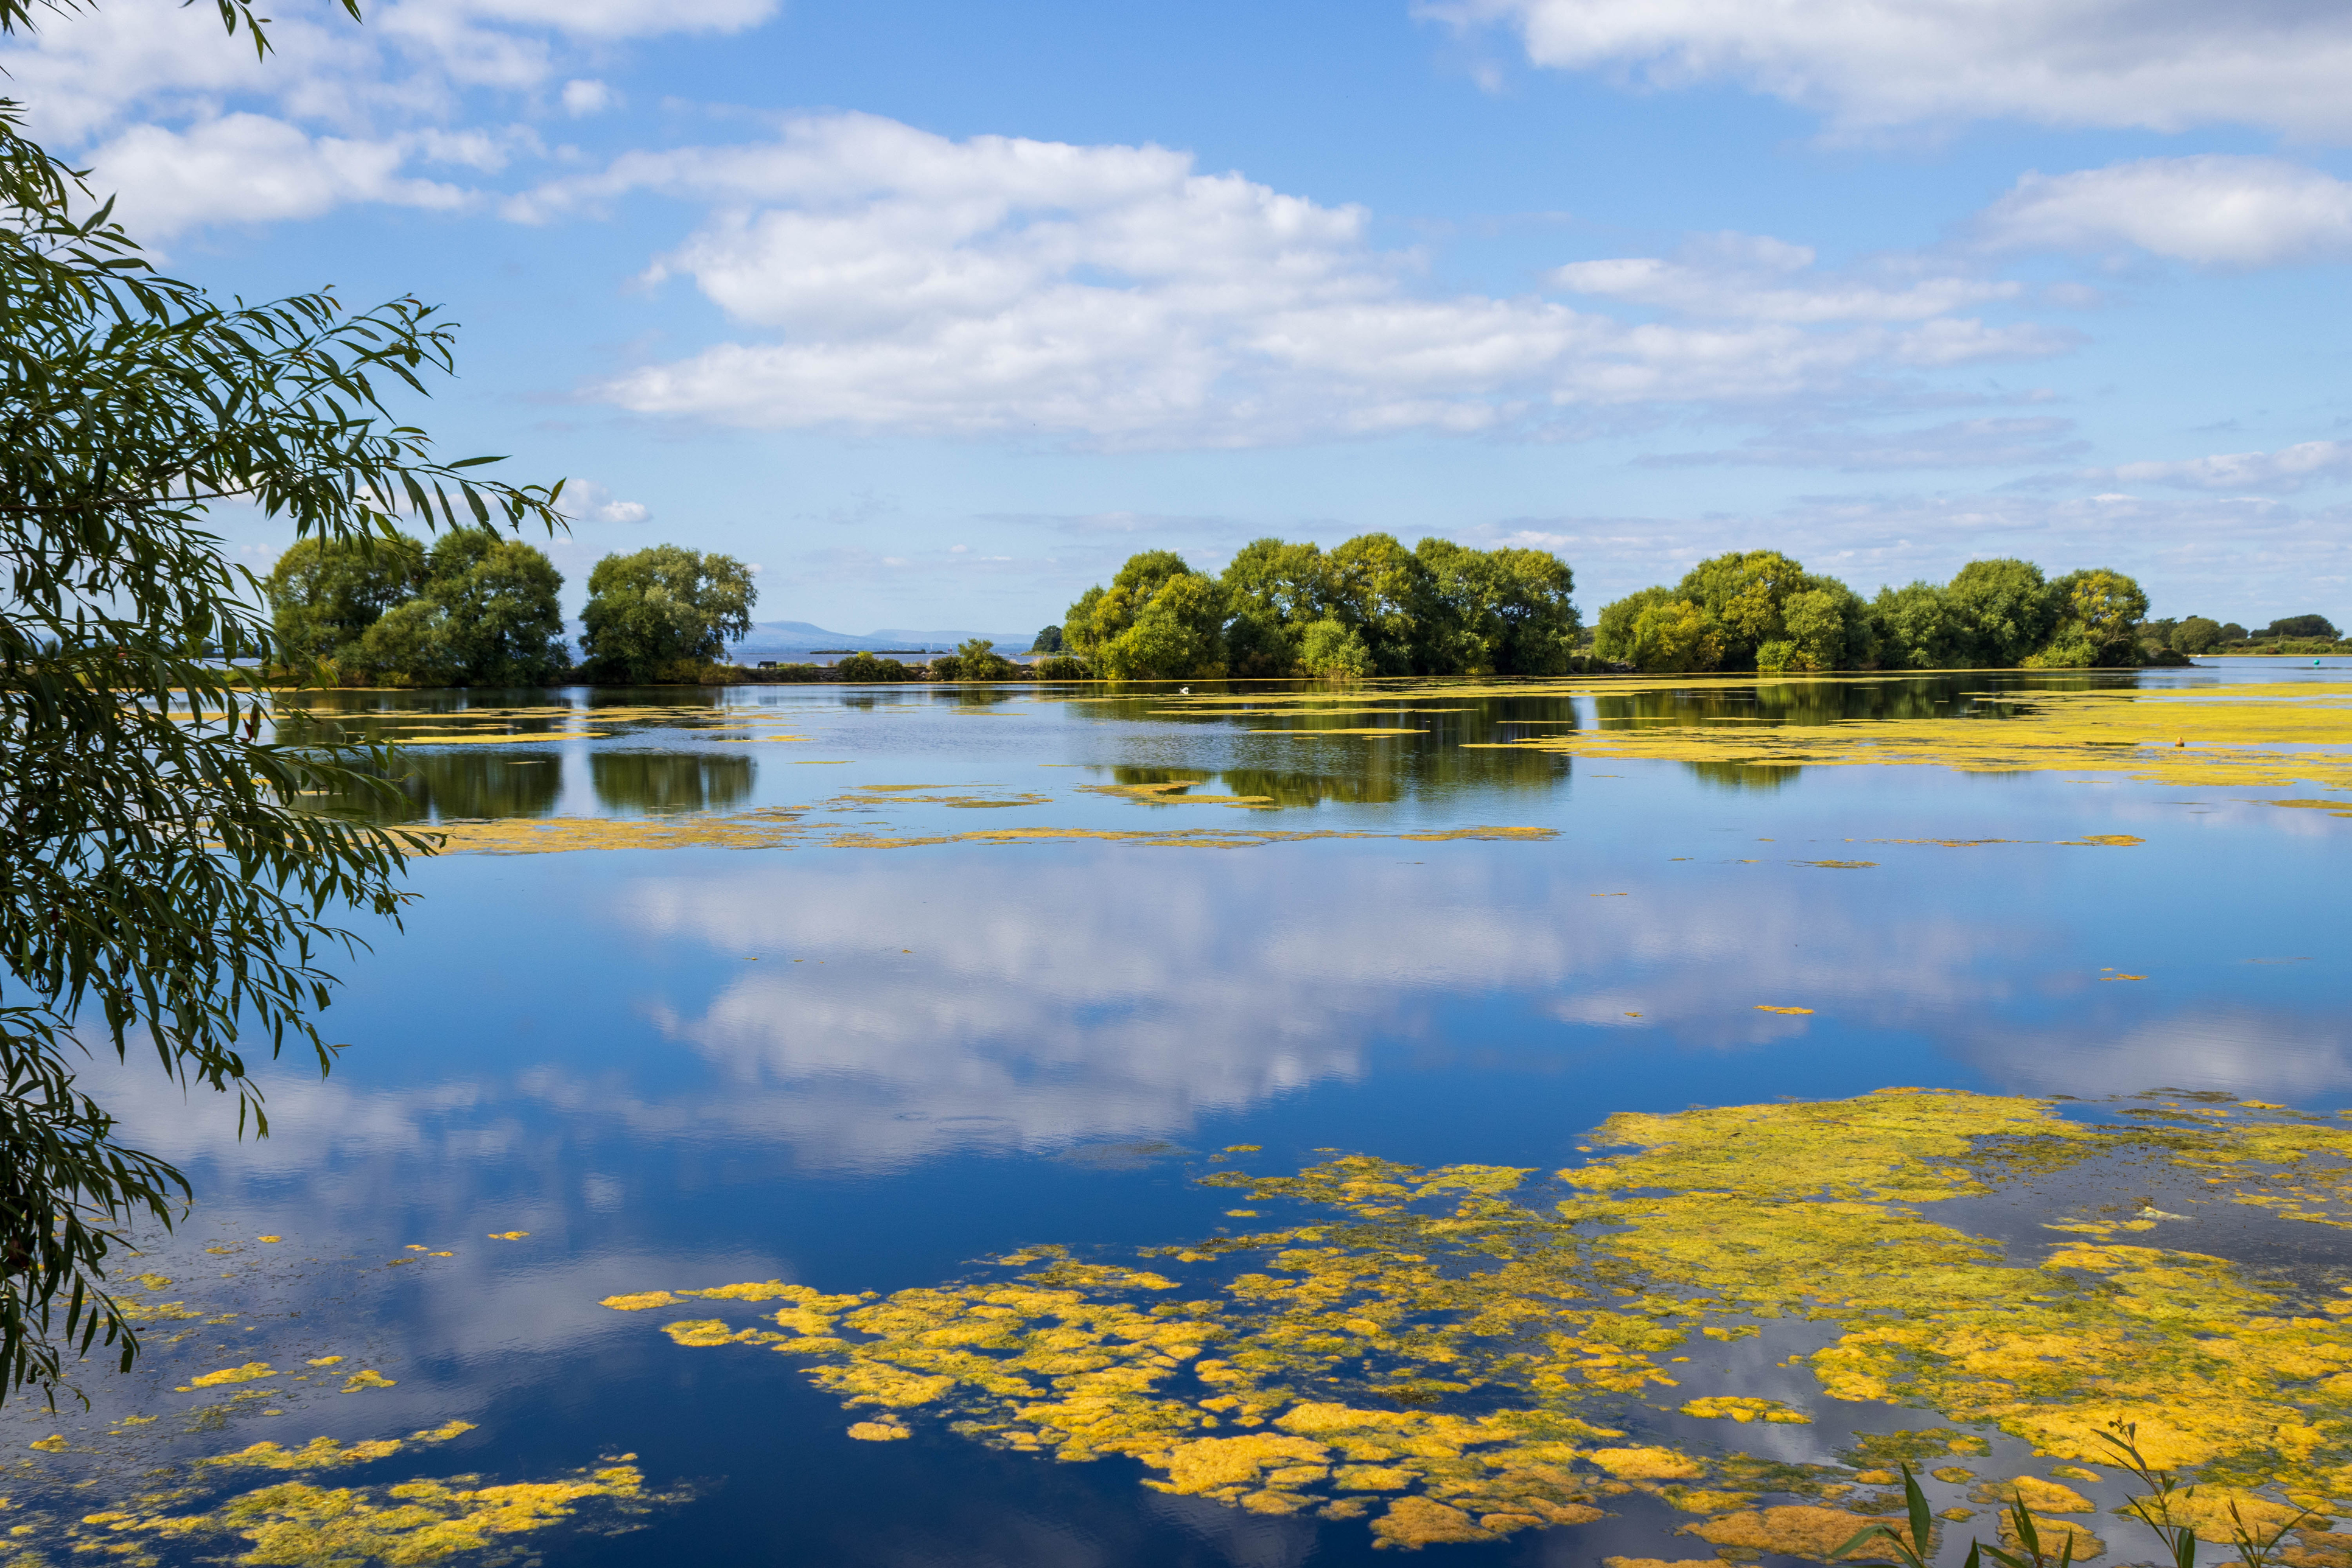 What’s the blooming problem with Lough Neagh?